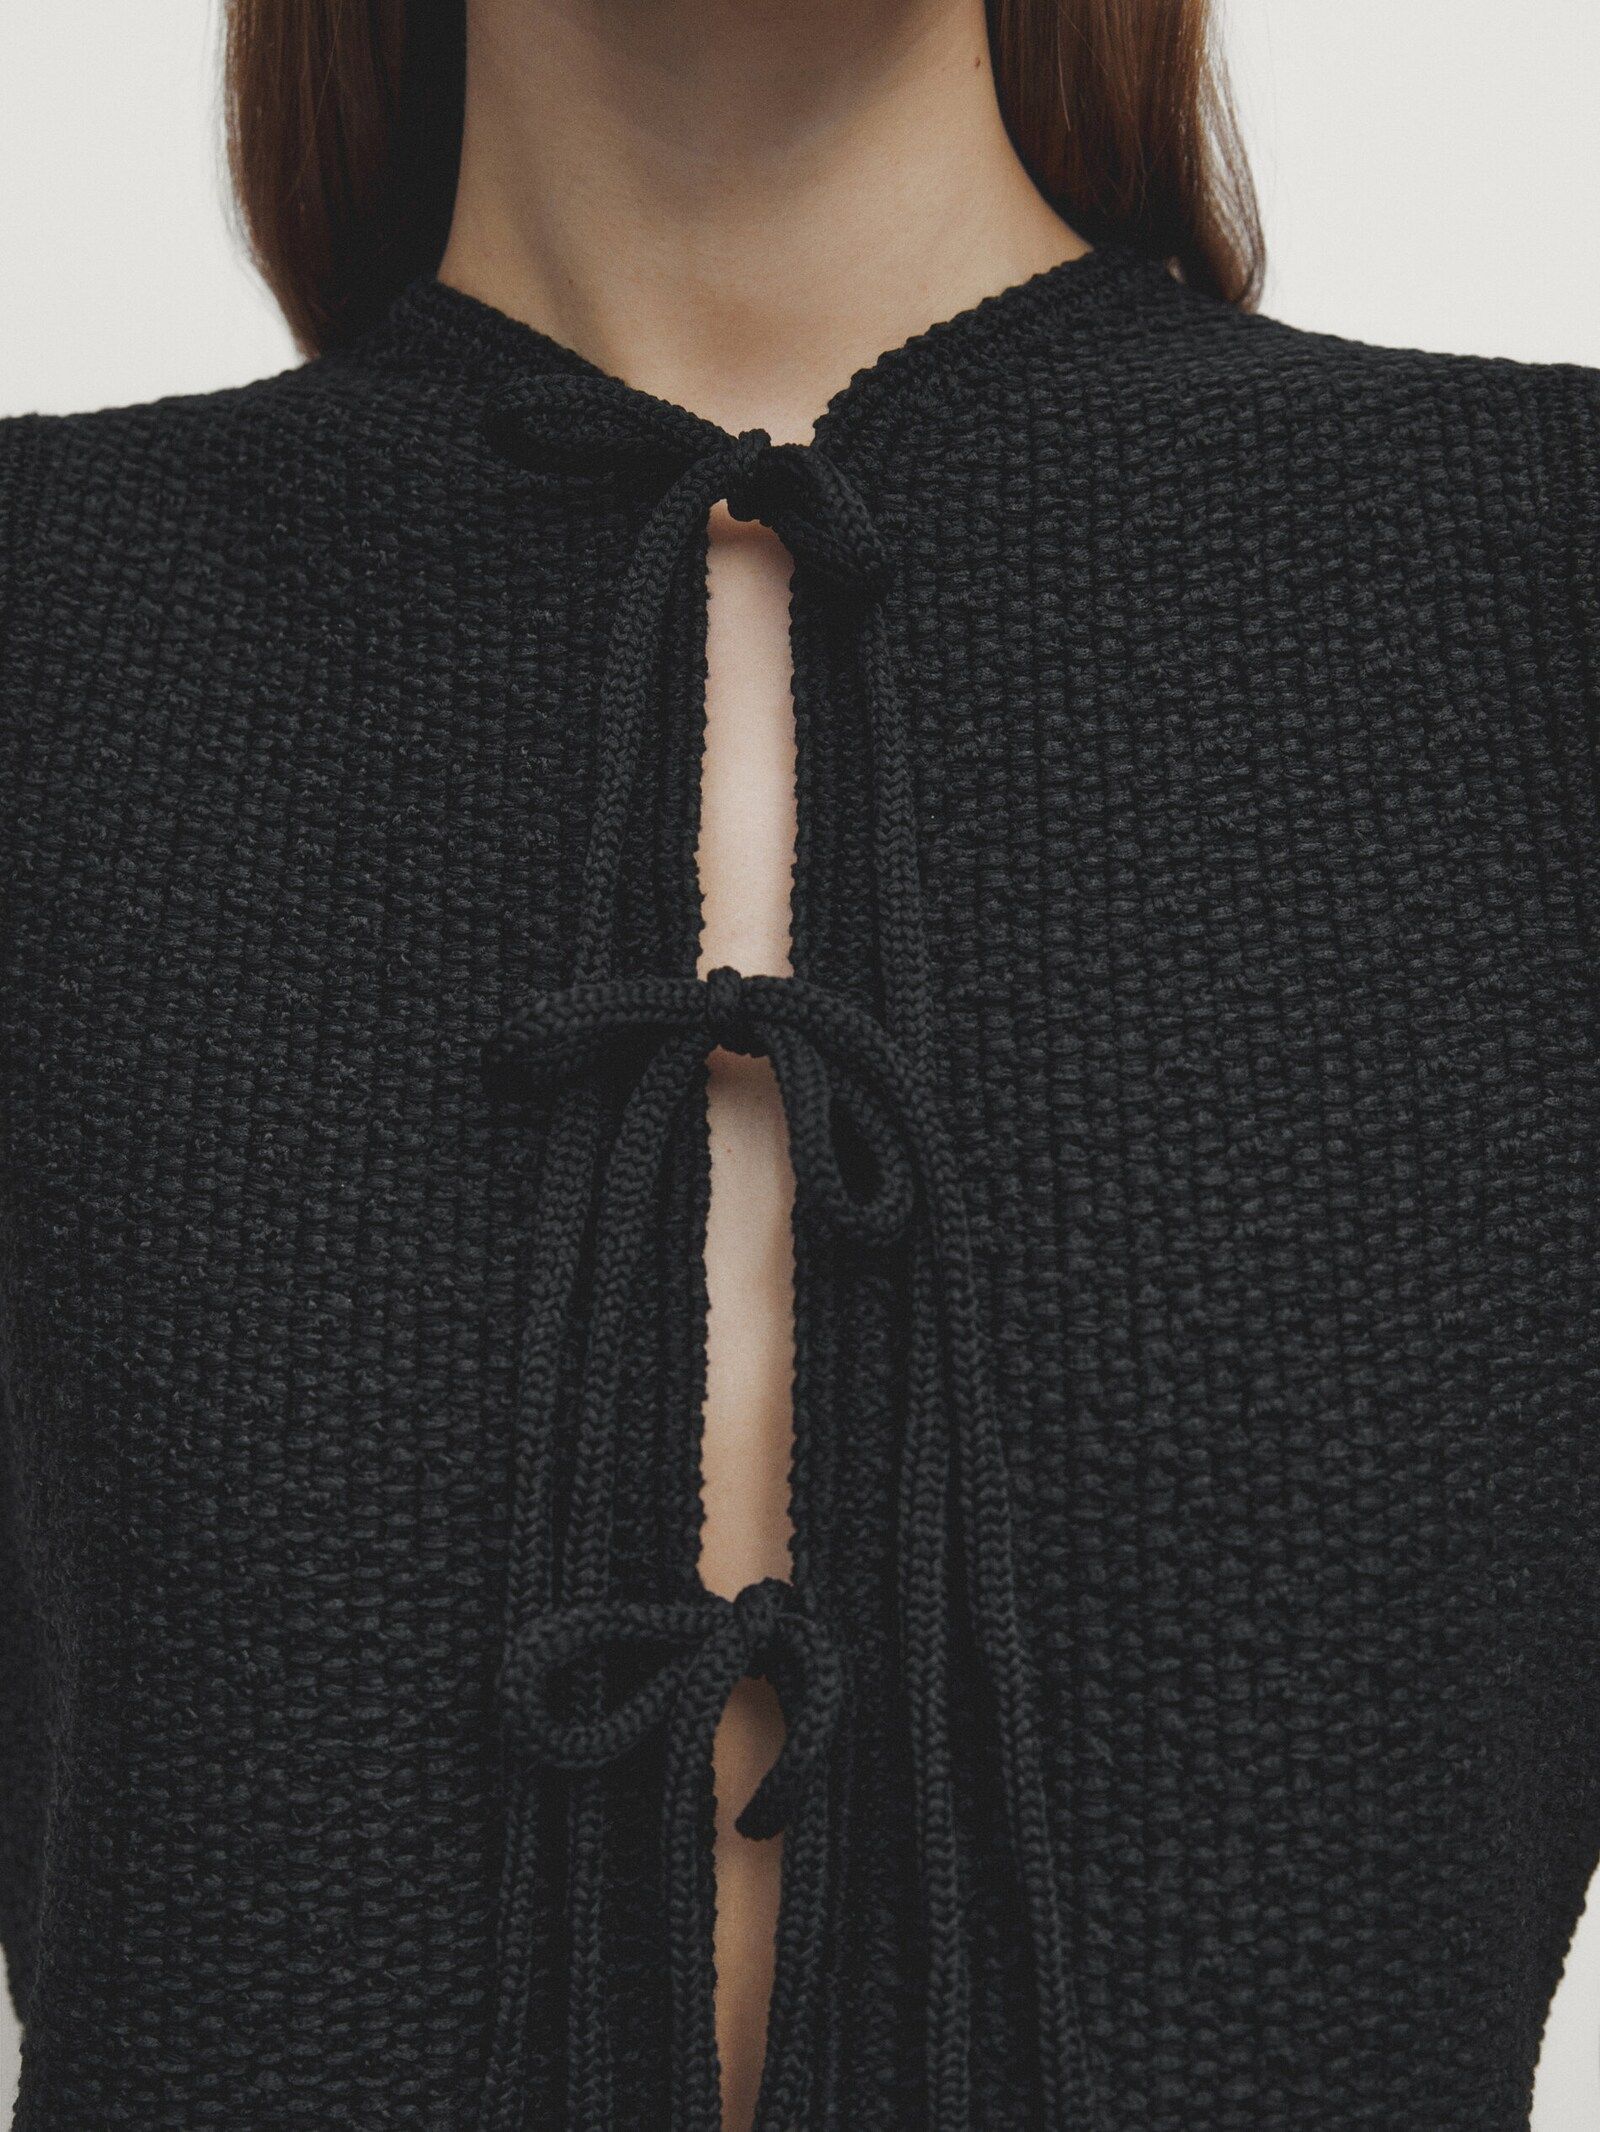 Knit vest with crew neck and tie details | Massimo Dutti UK